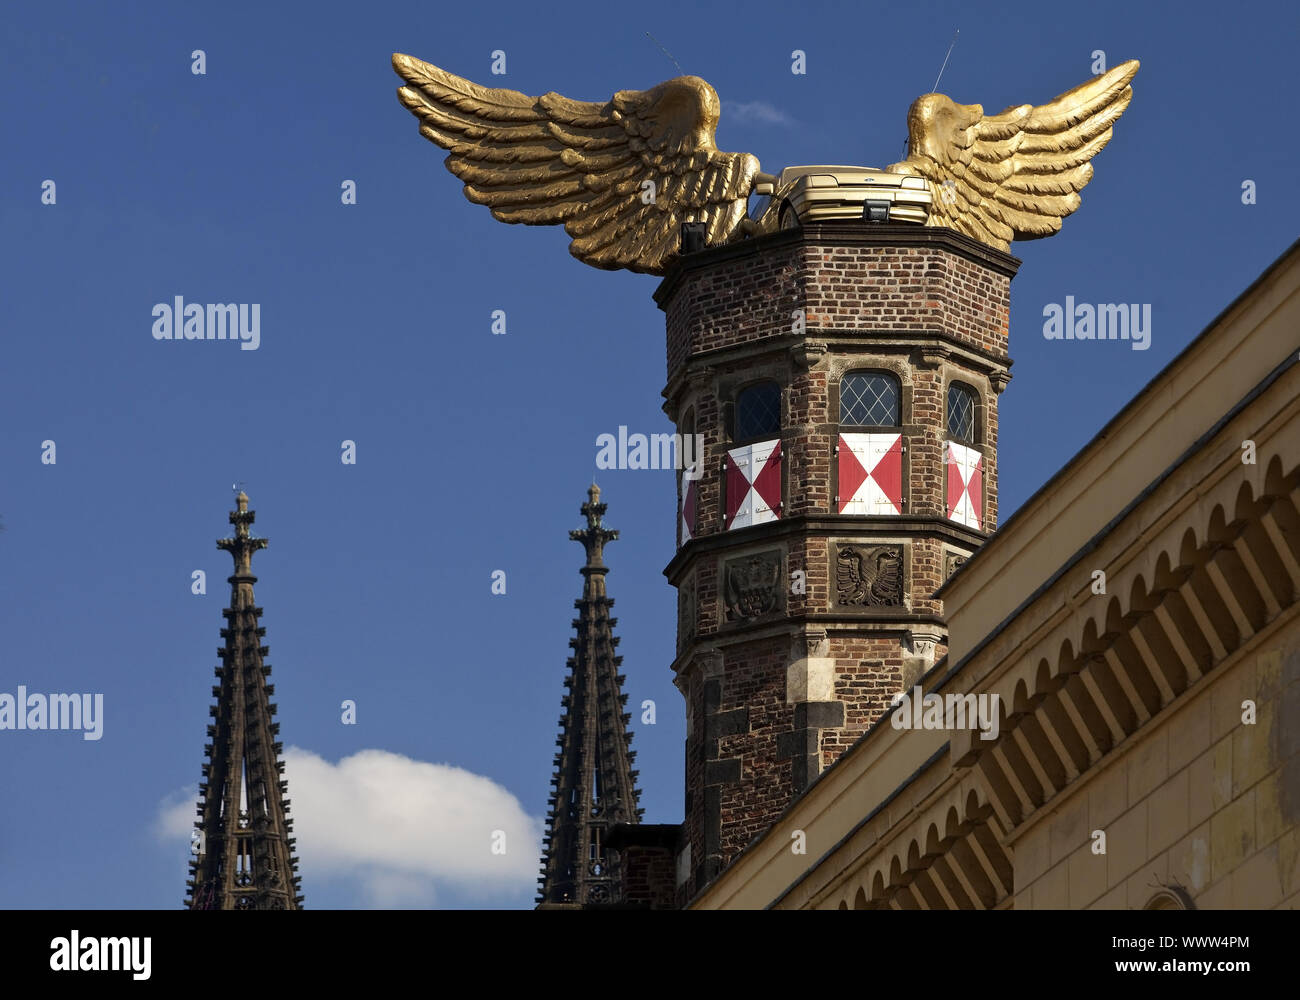 golden car with wings on the roof of municipal museum, Cologne, North Rhine-Westphalia, Germany Stock Photo